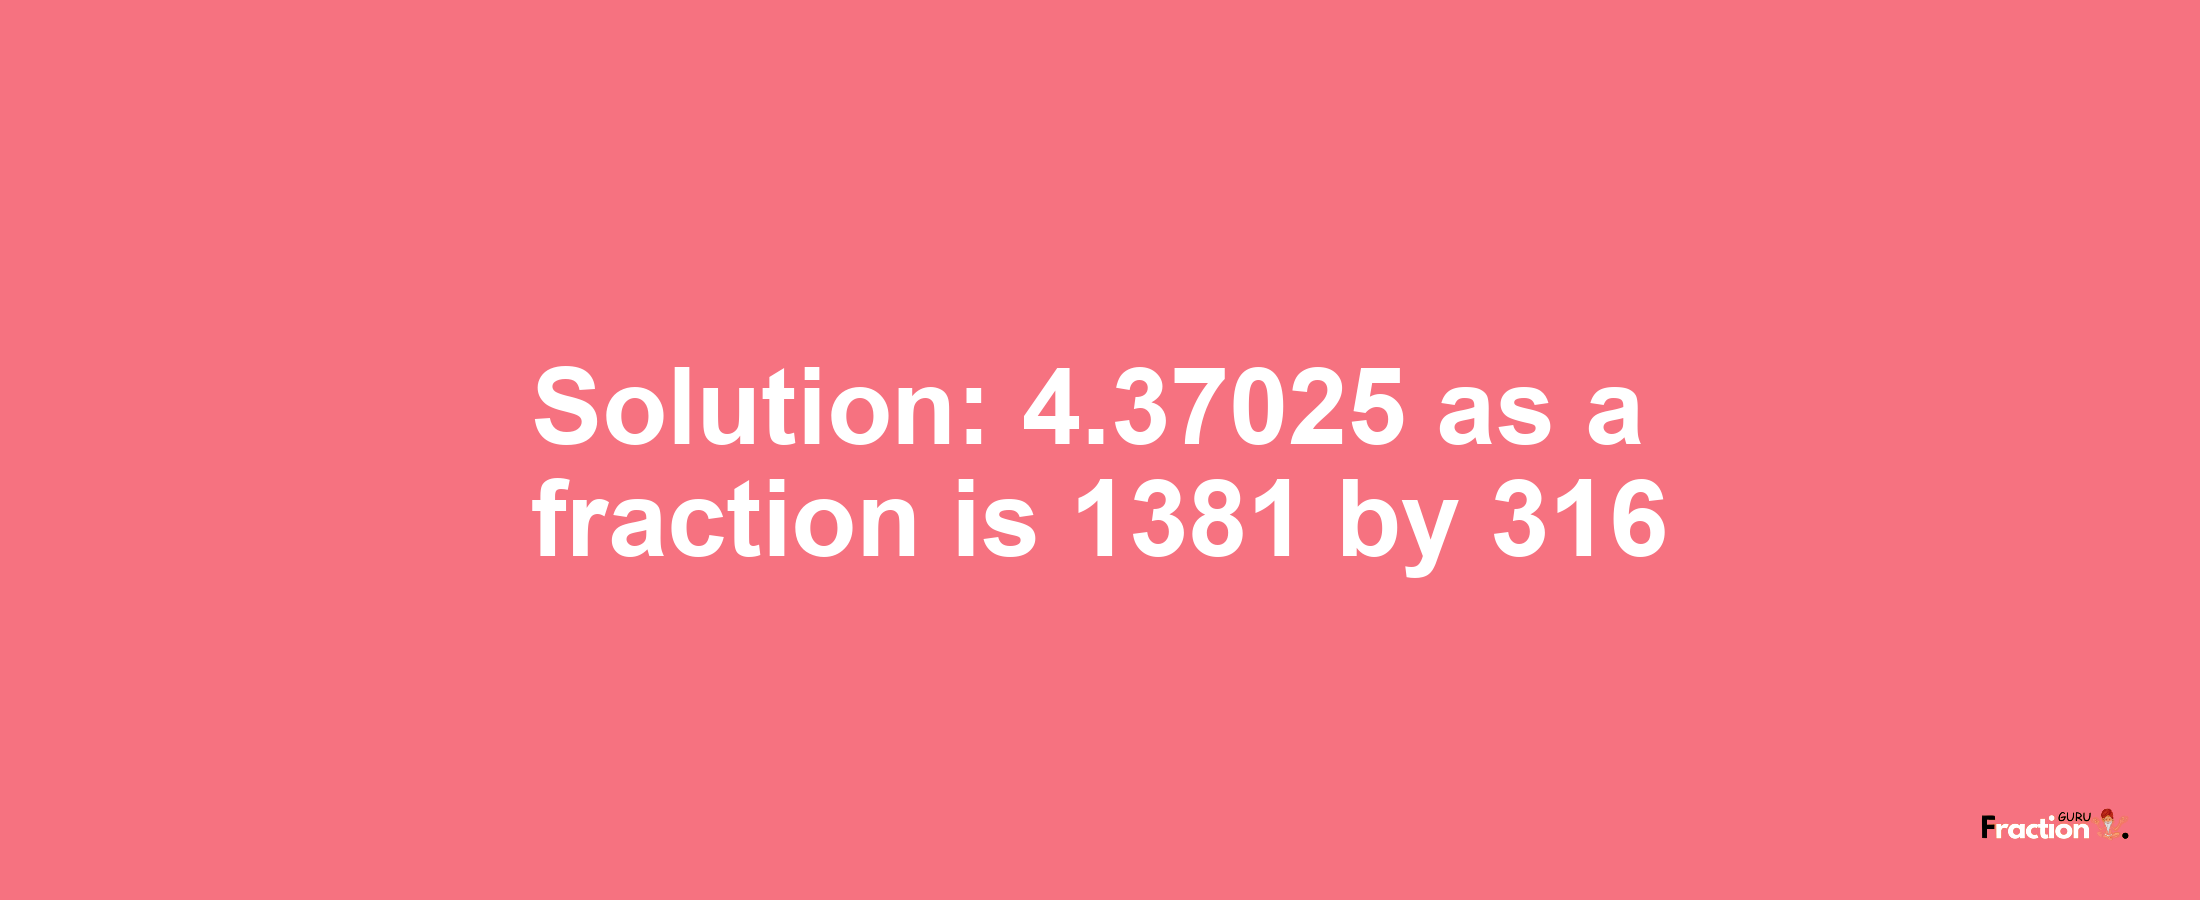 Solution:4.37025 as a fraction is 1381/316